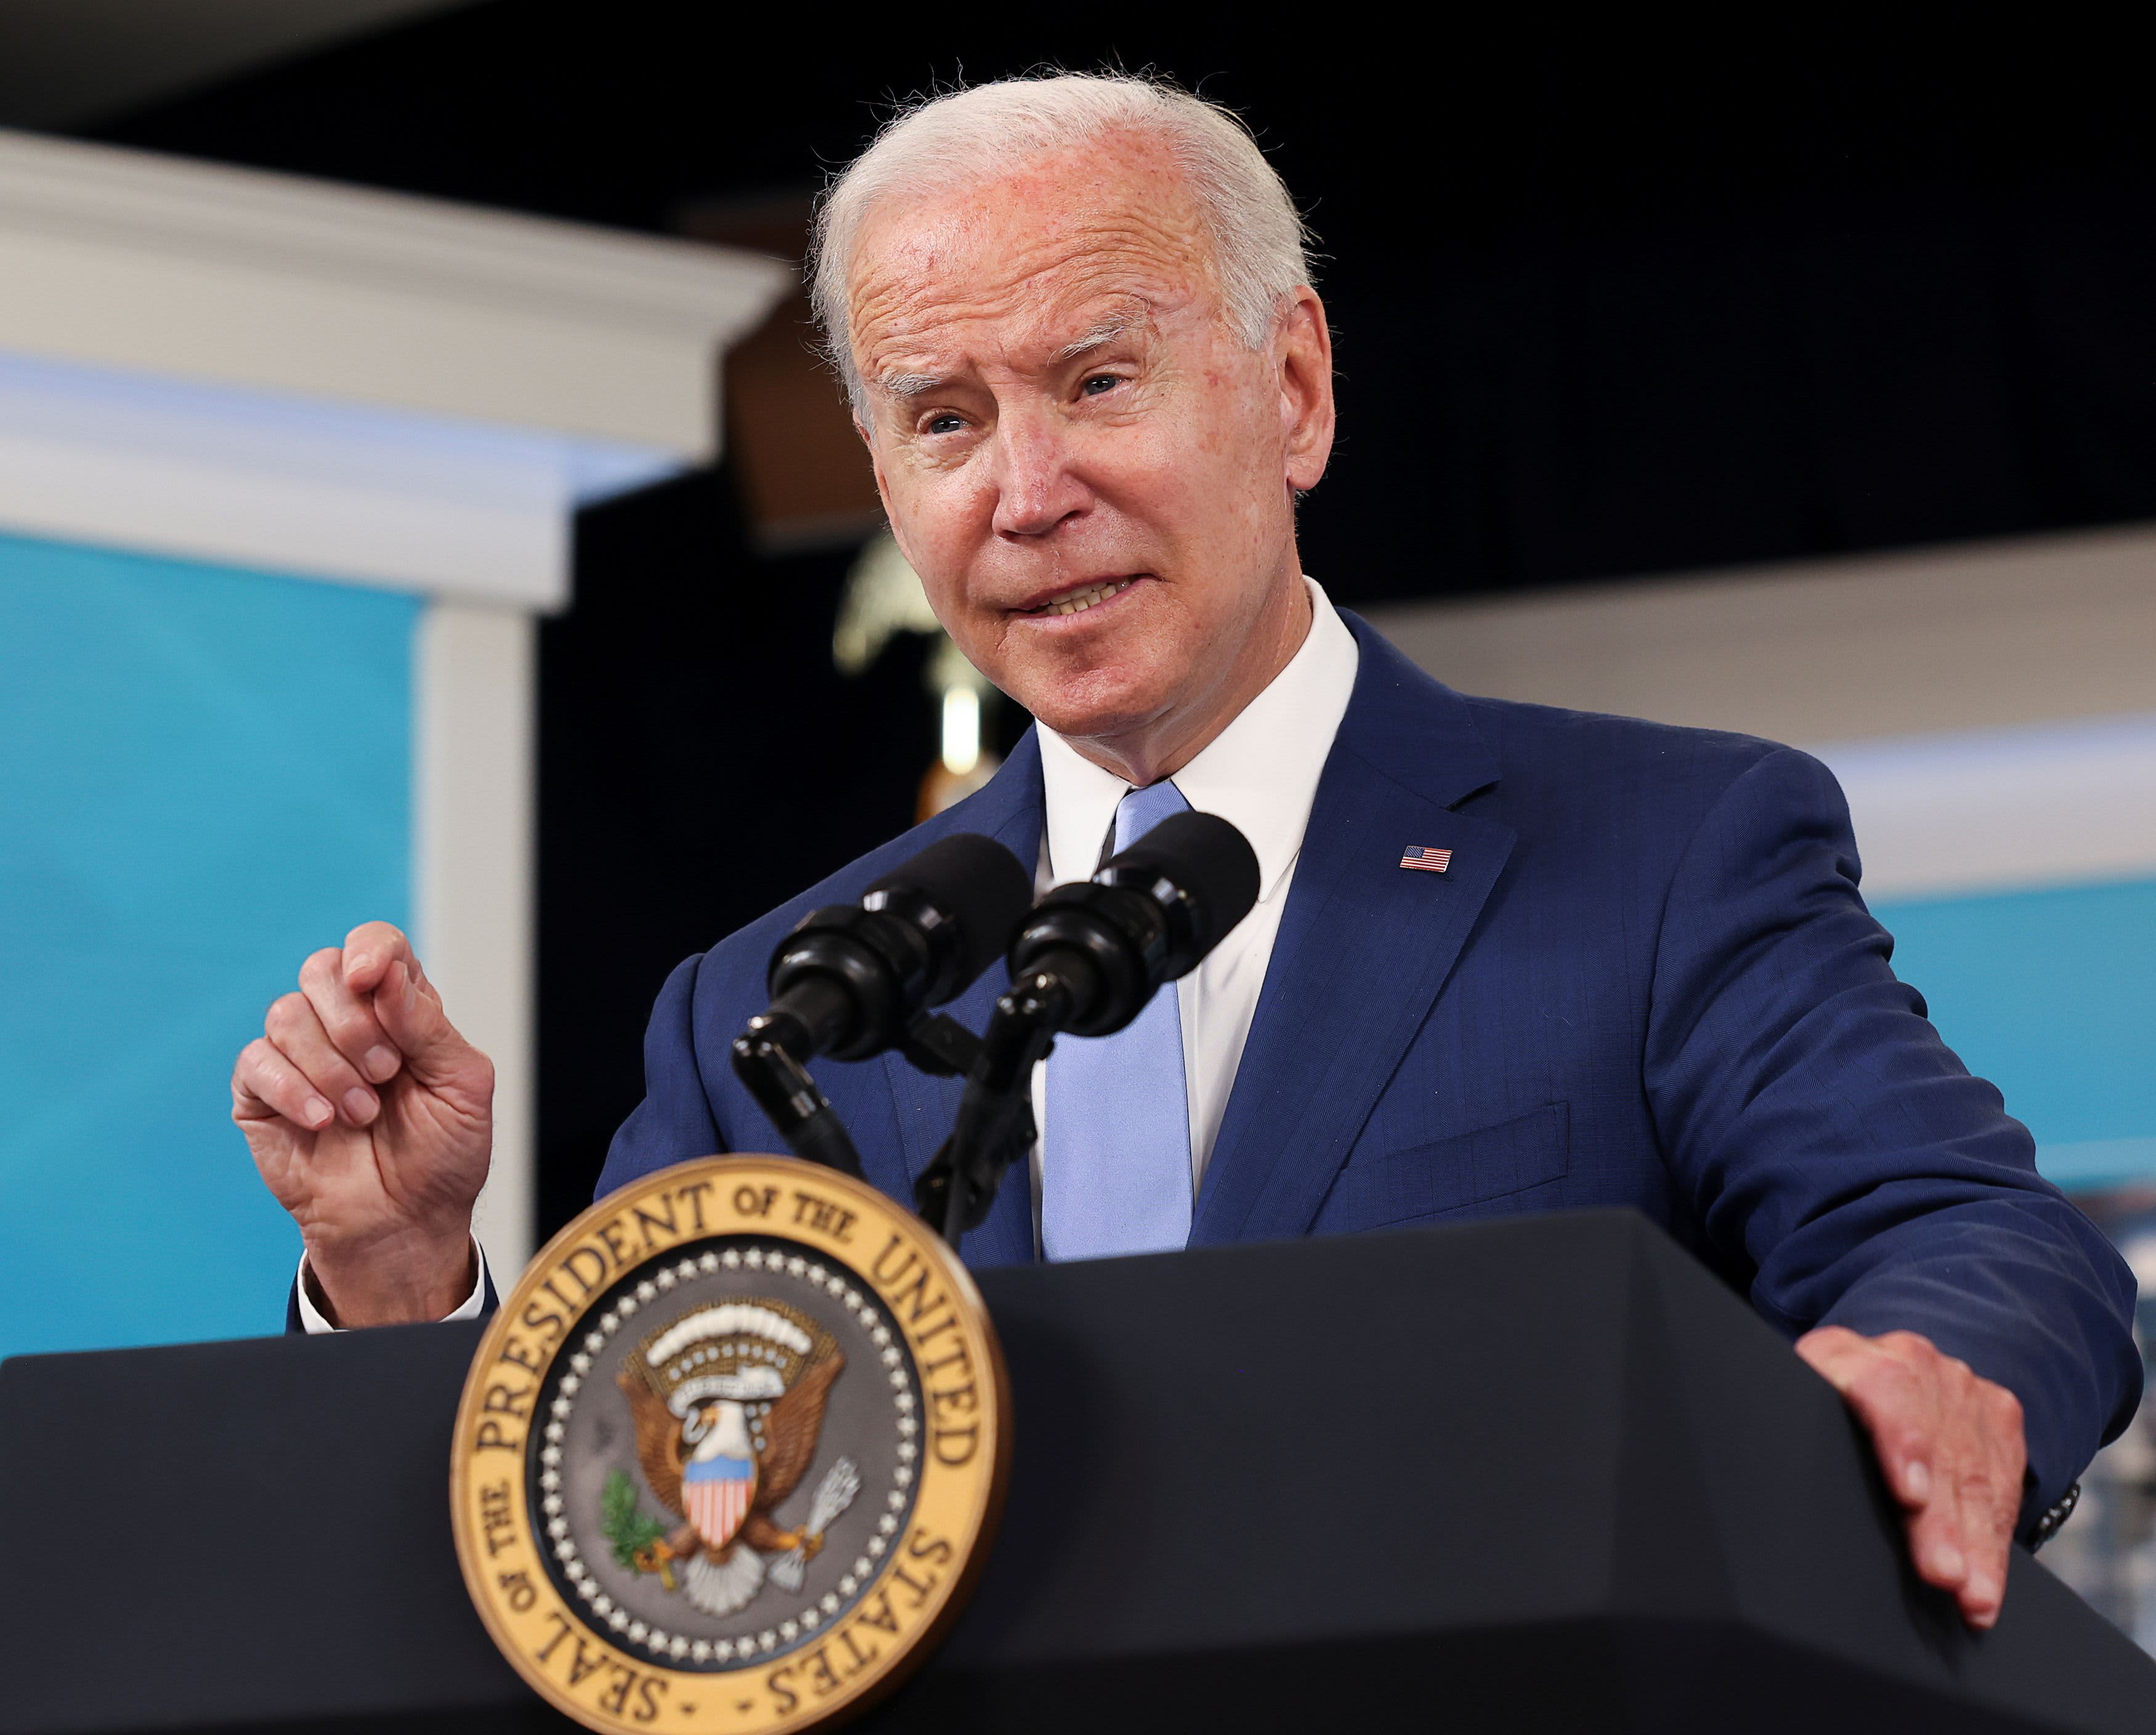 The September jobs number was a big miss, but Biden sees 'great progress' in rising wages, lower unemployment rate - CNBC